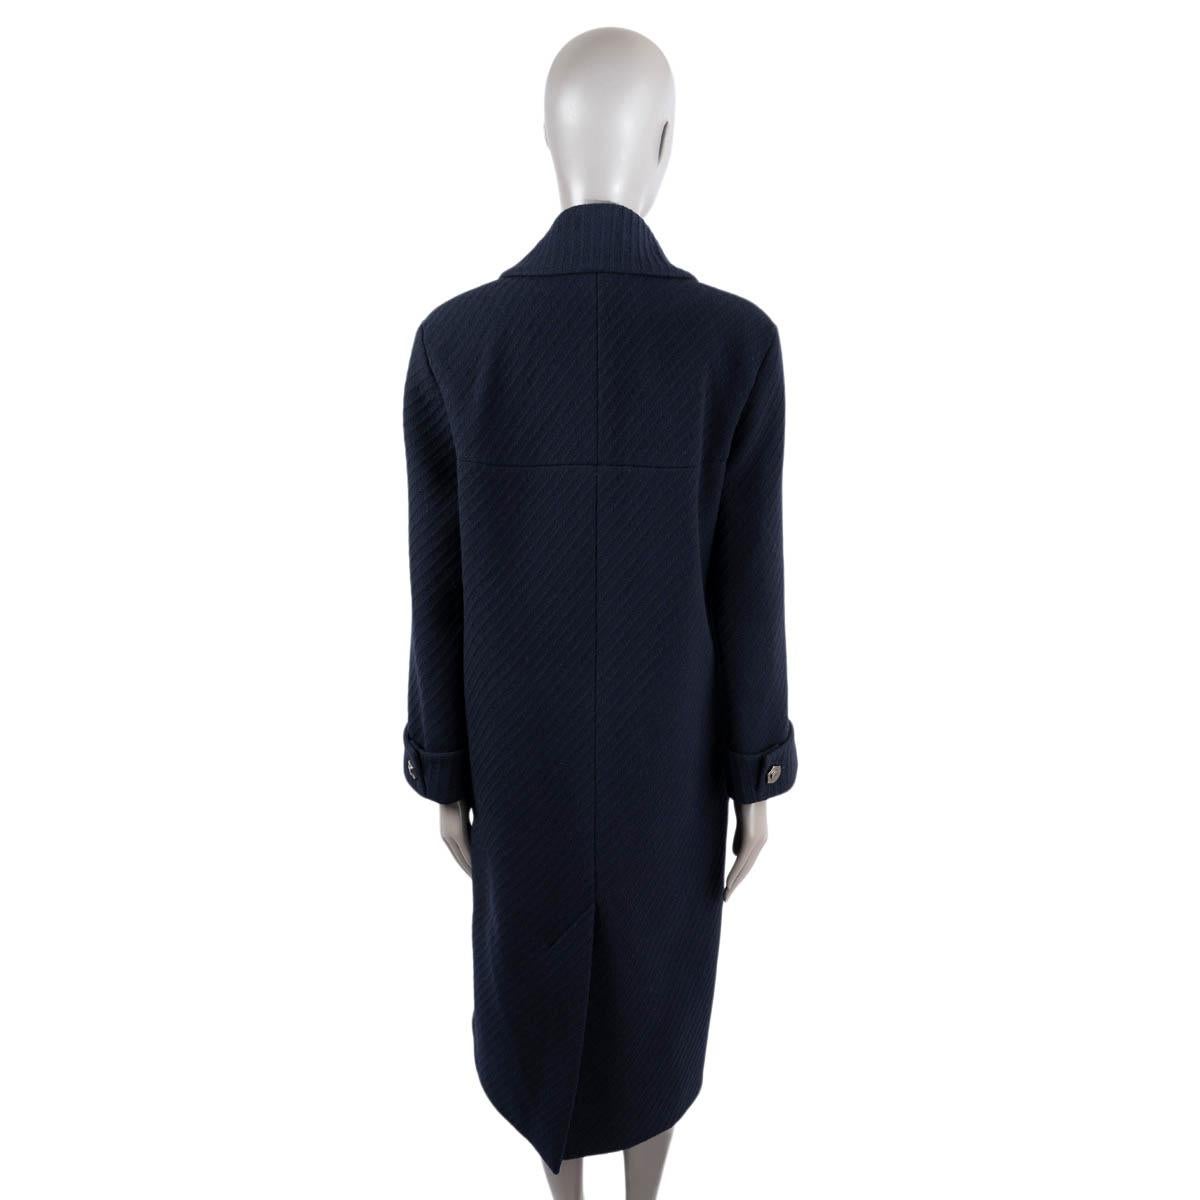 CHANEL navy blue wool 2018 18A HAMBURG DOUBLE BREASTED Coat Jacket 42 L For Sale 1